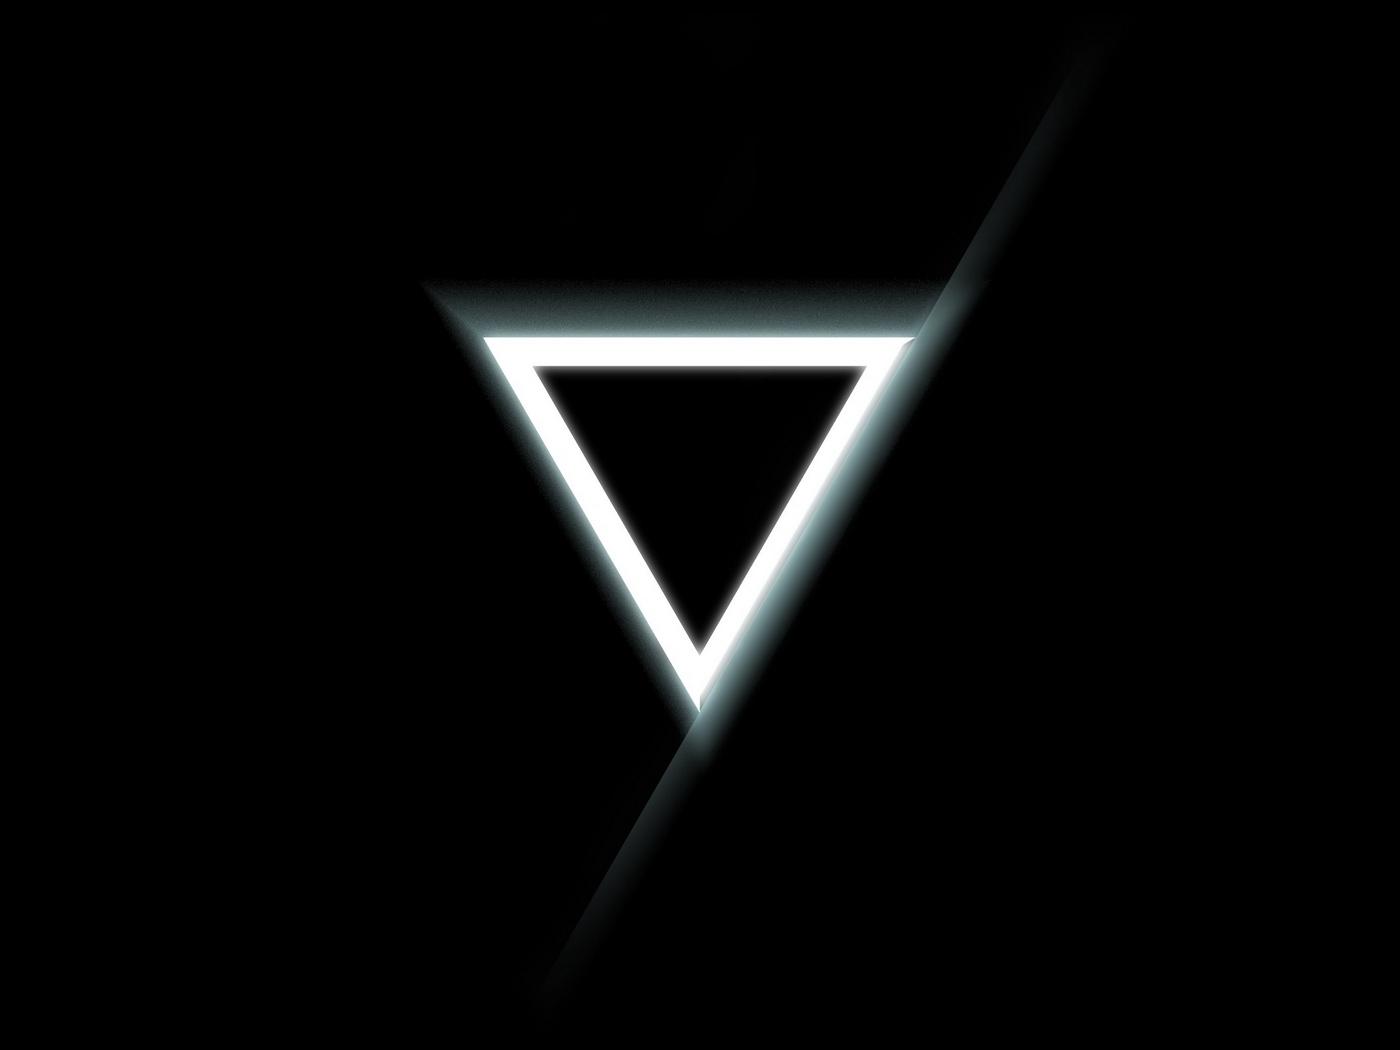 Download wallpaper 1400x1050 triangle, inverted, black